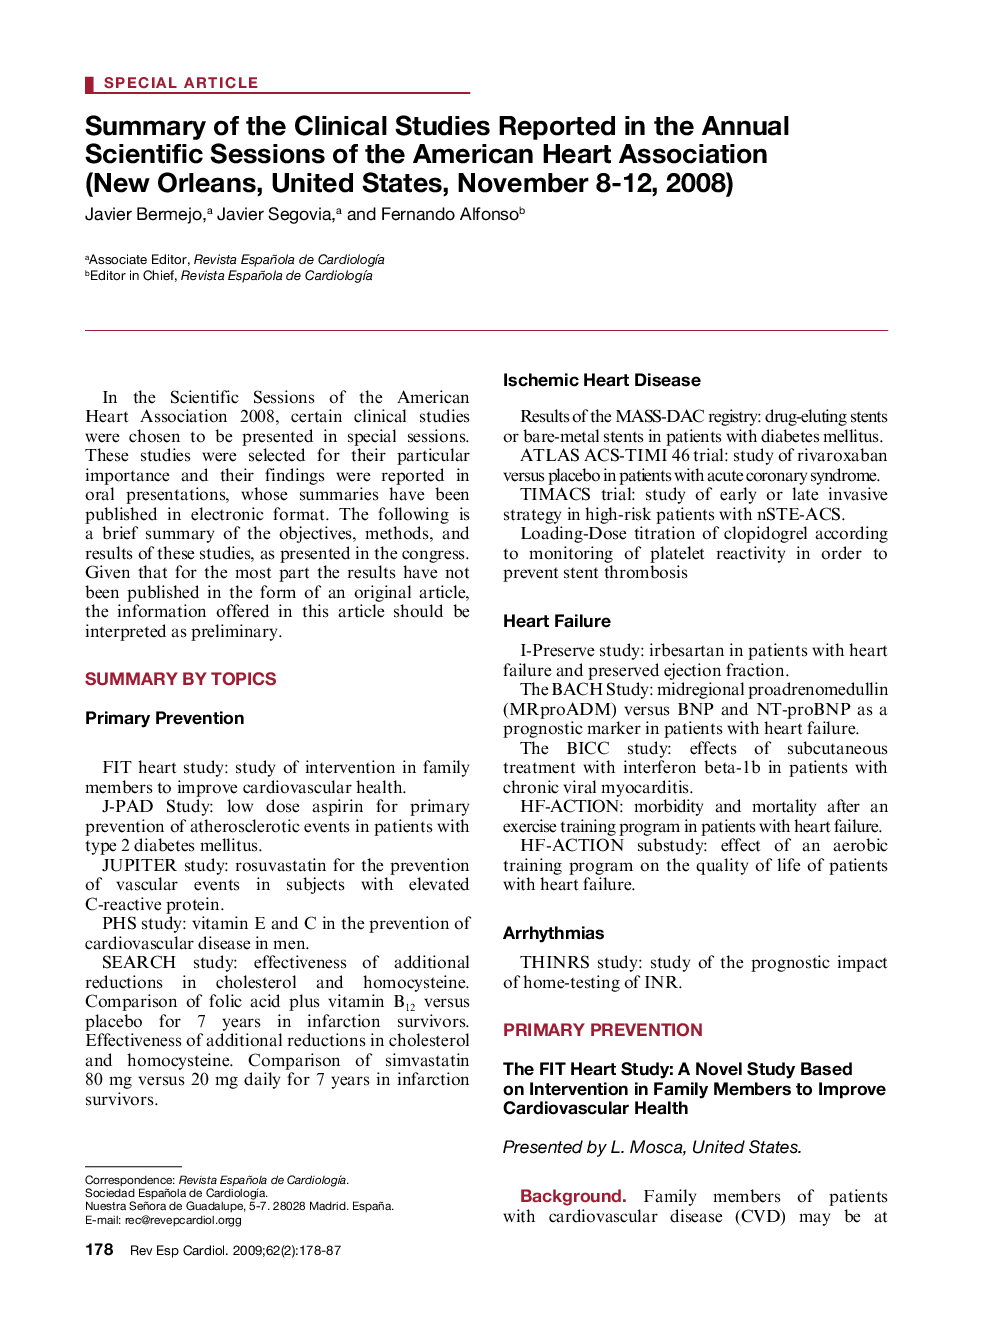 Summary of the Clinical Studies Reported in the Annual Scientific Sessions of the American Heart Association (New Orleans, United States, November 8-12, 2008)